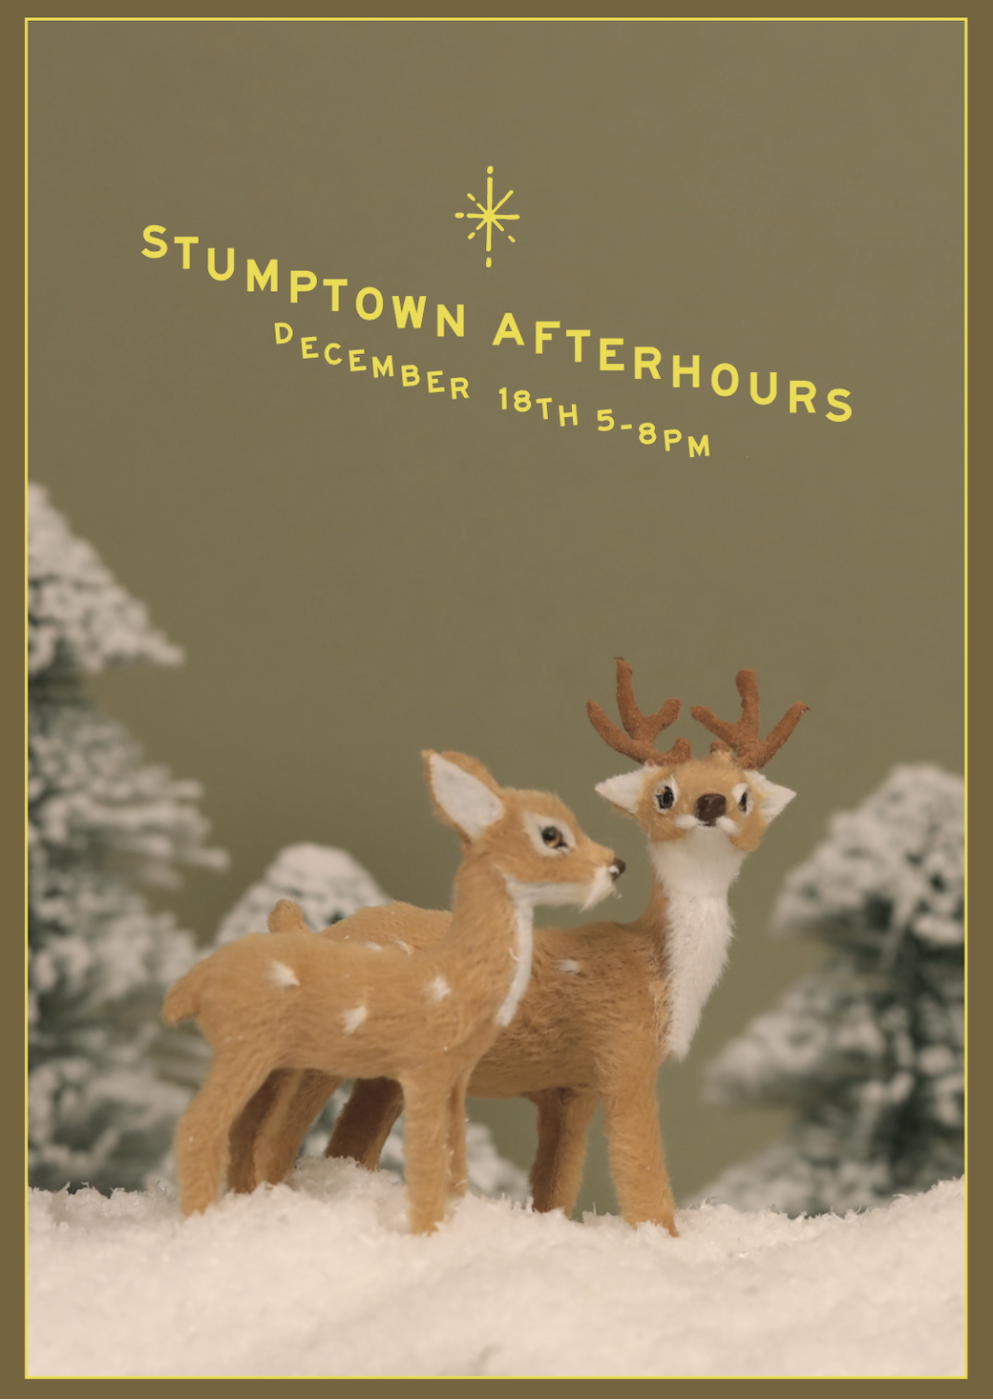 Stumptown After Hours promo